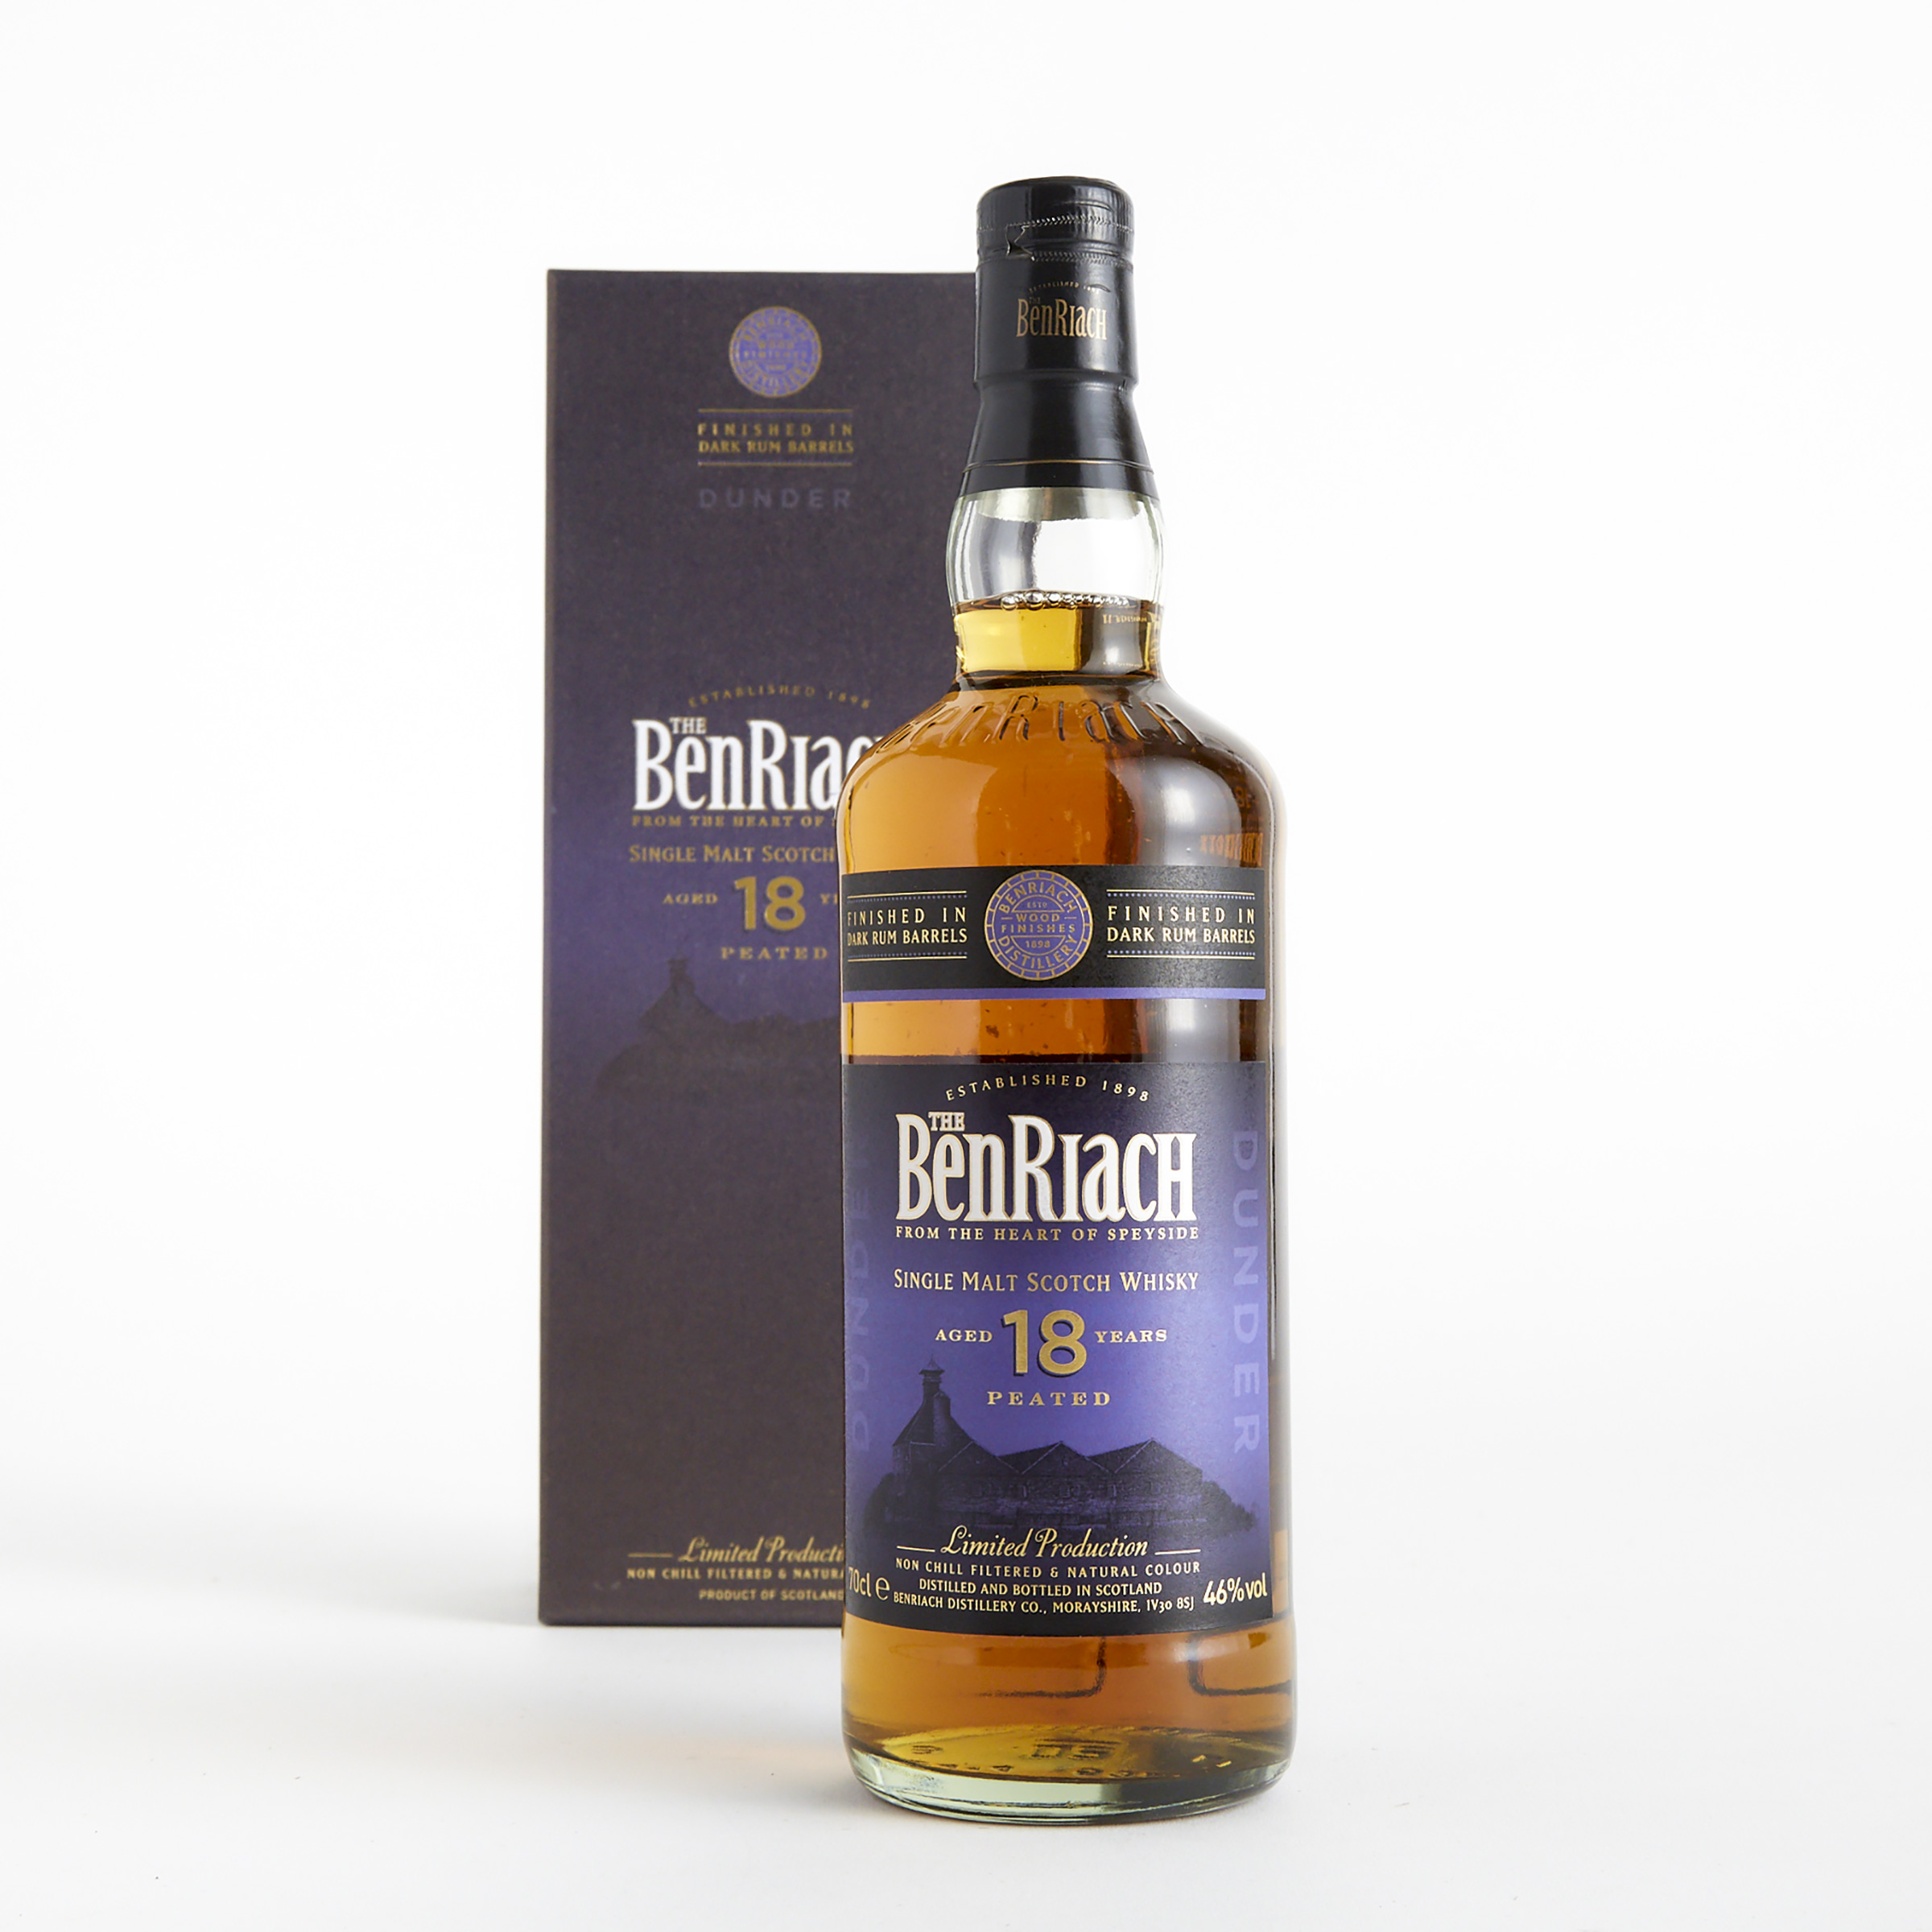 THE BENRIACH SINGLE MALT SCOTCH WHISKY 18 YEARS (ONE 70 CL)